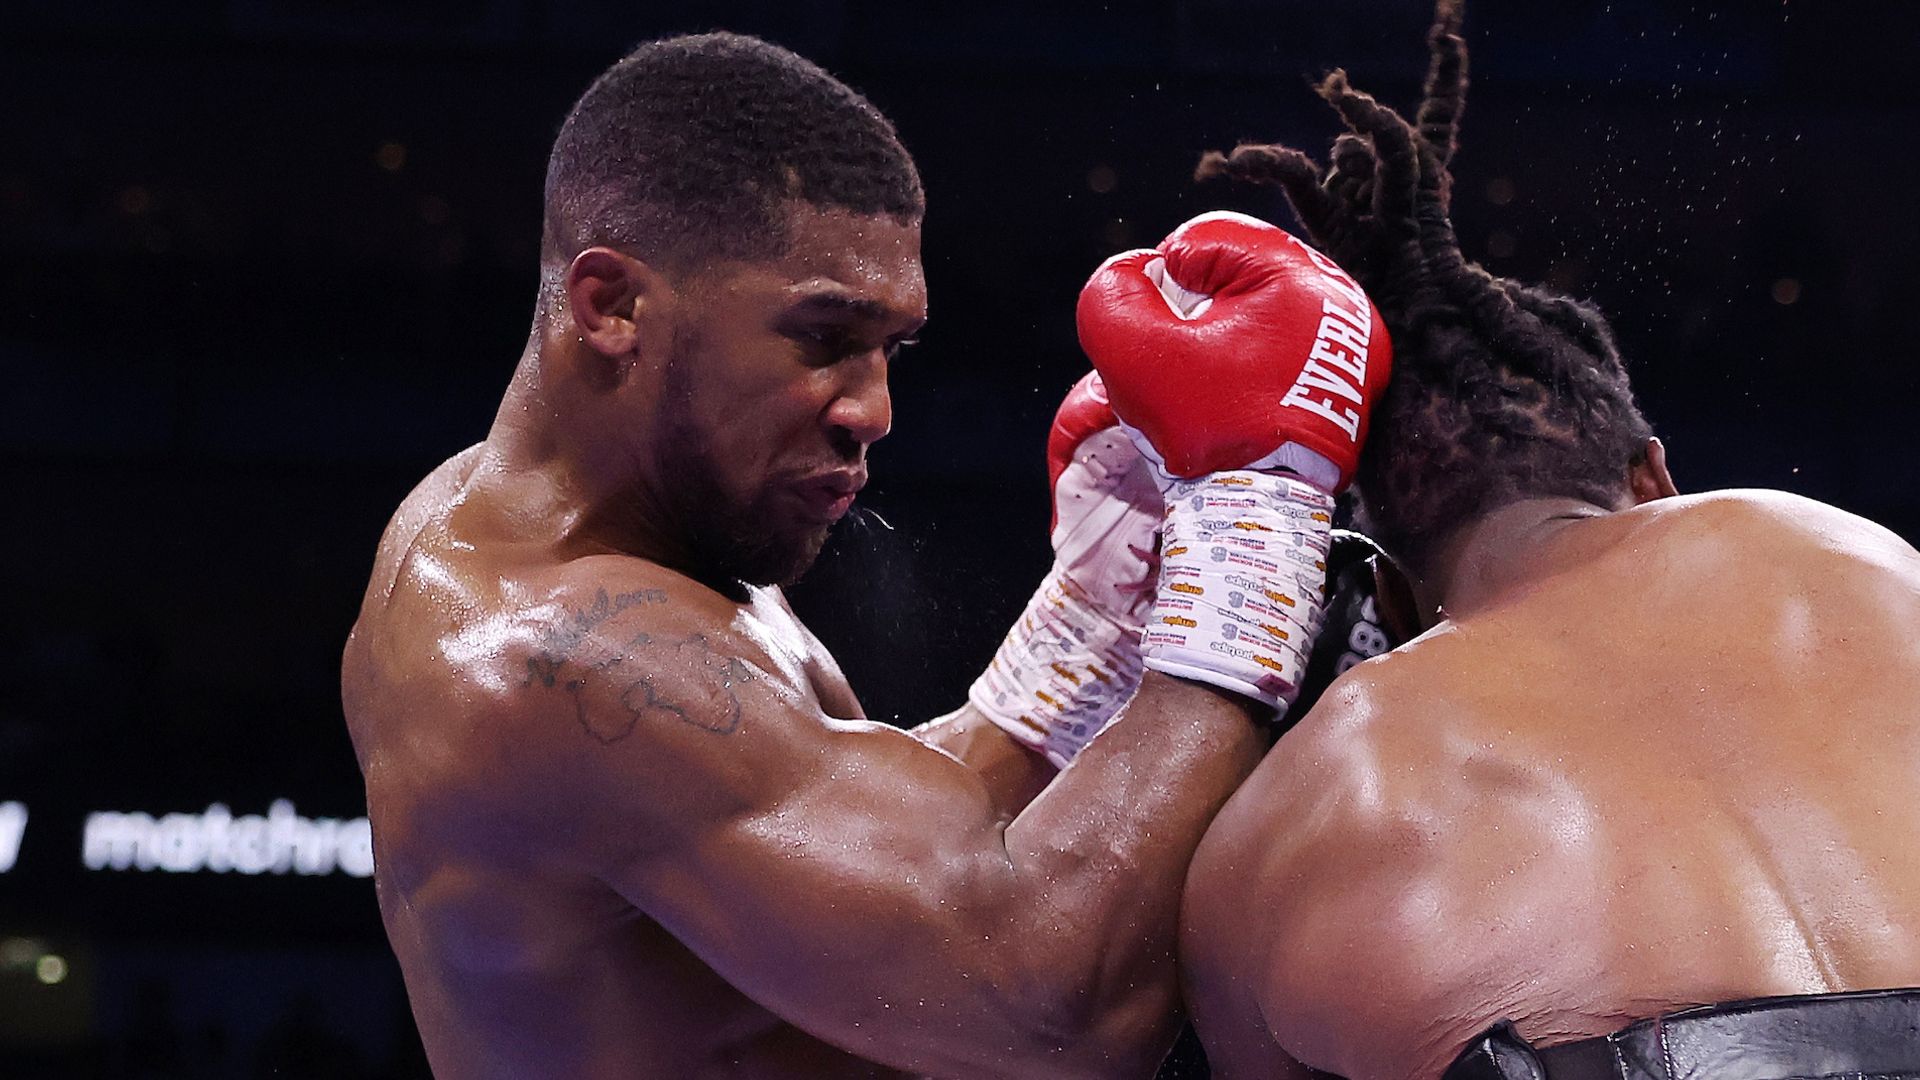 Joshua beats Franklin by unanimous decision - as it happened